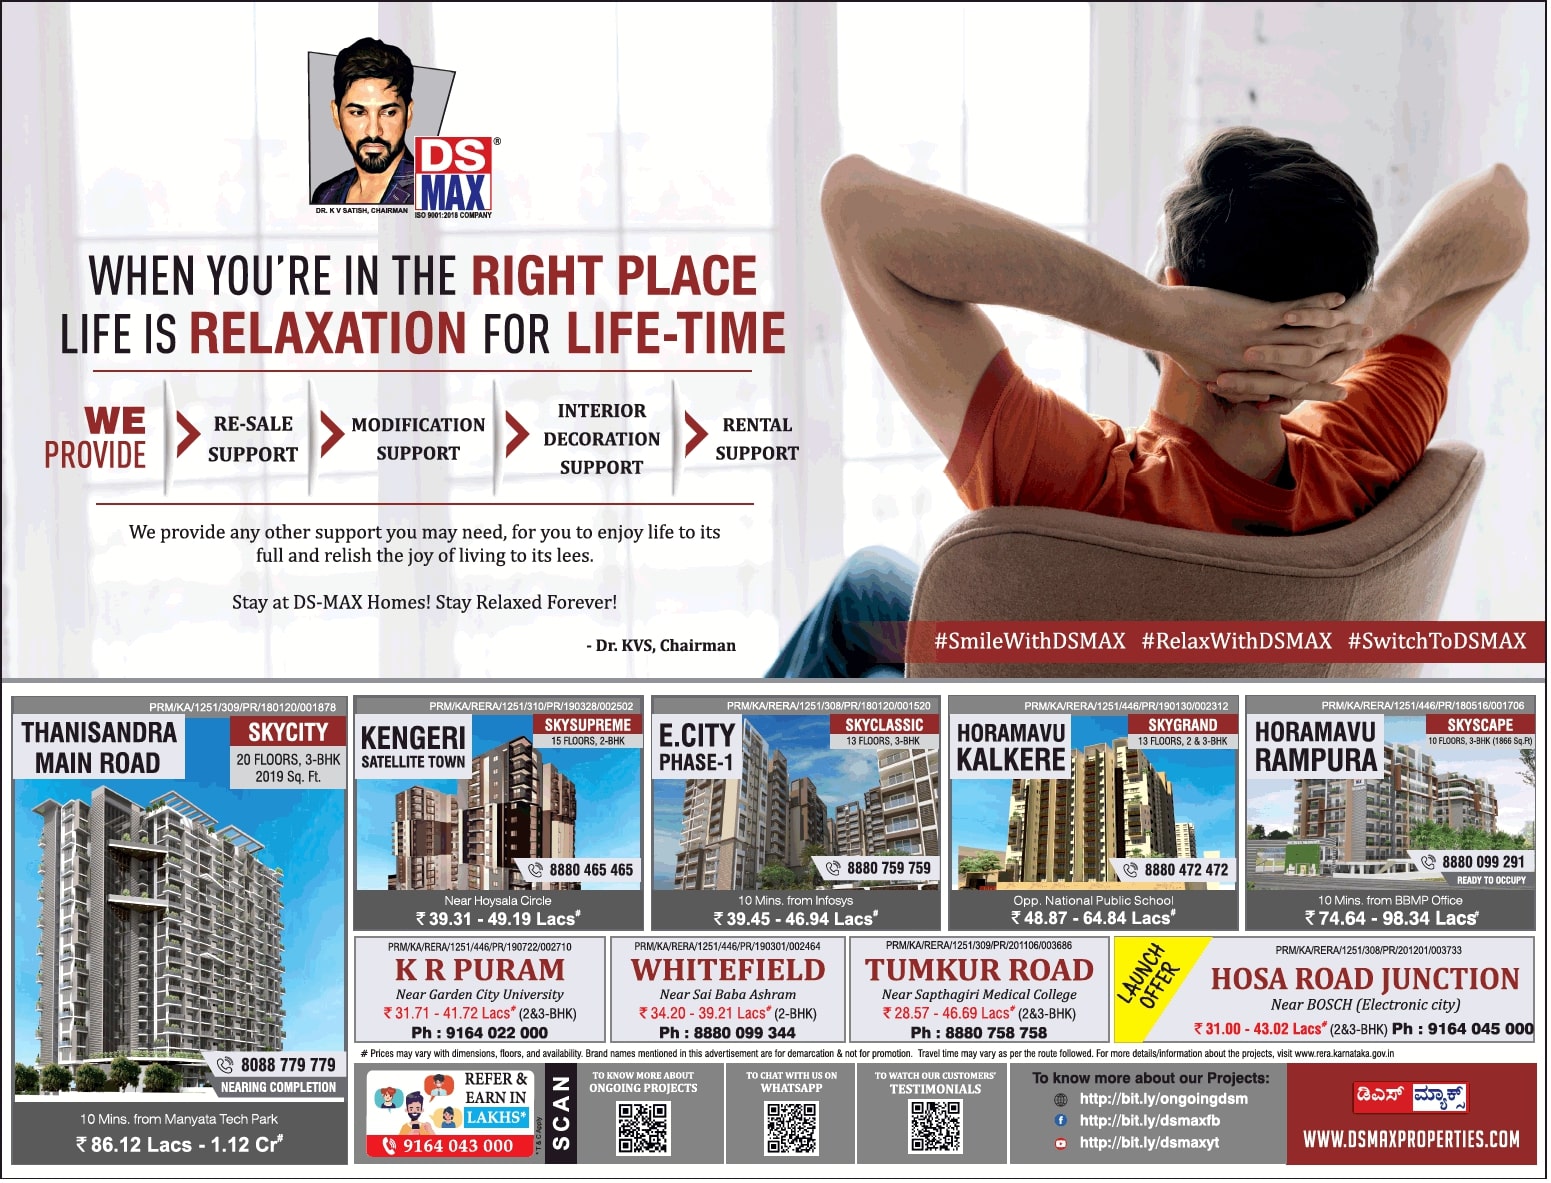 ds-max-when-you-are-in-the-right-place-life-is-relaxation-for-life-time-ad-property-times-bangalore-08-01-2021